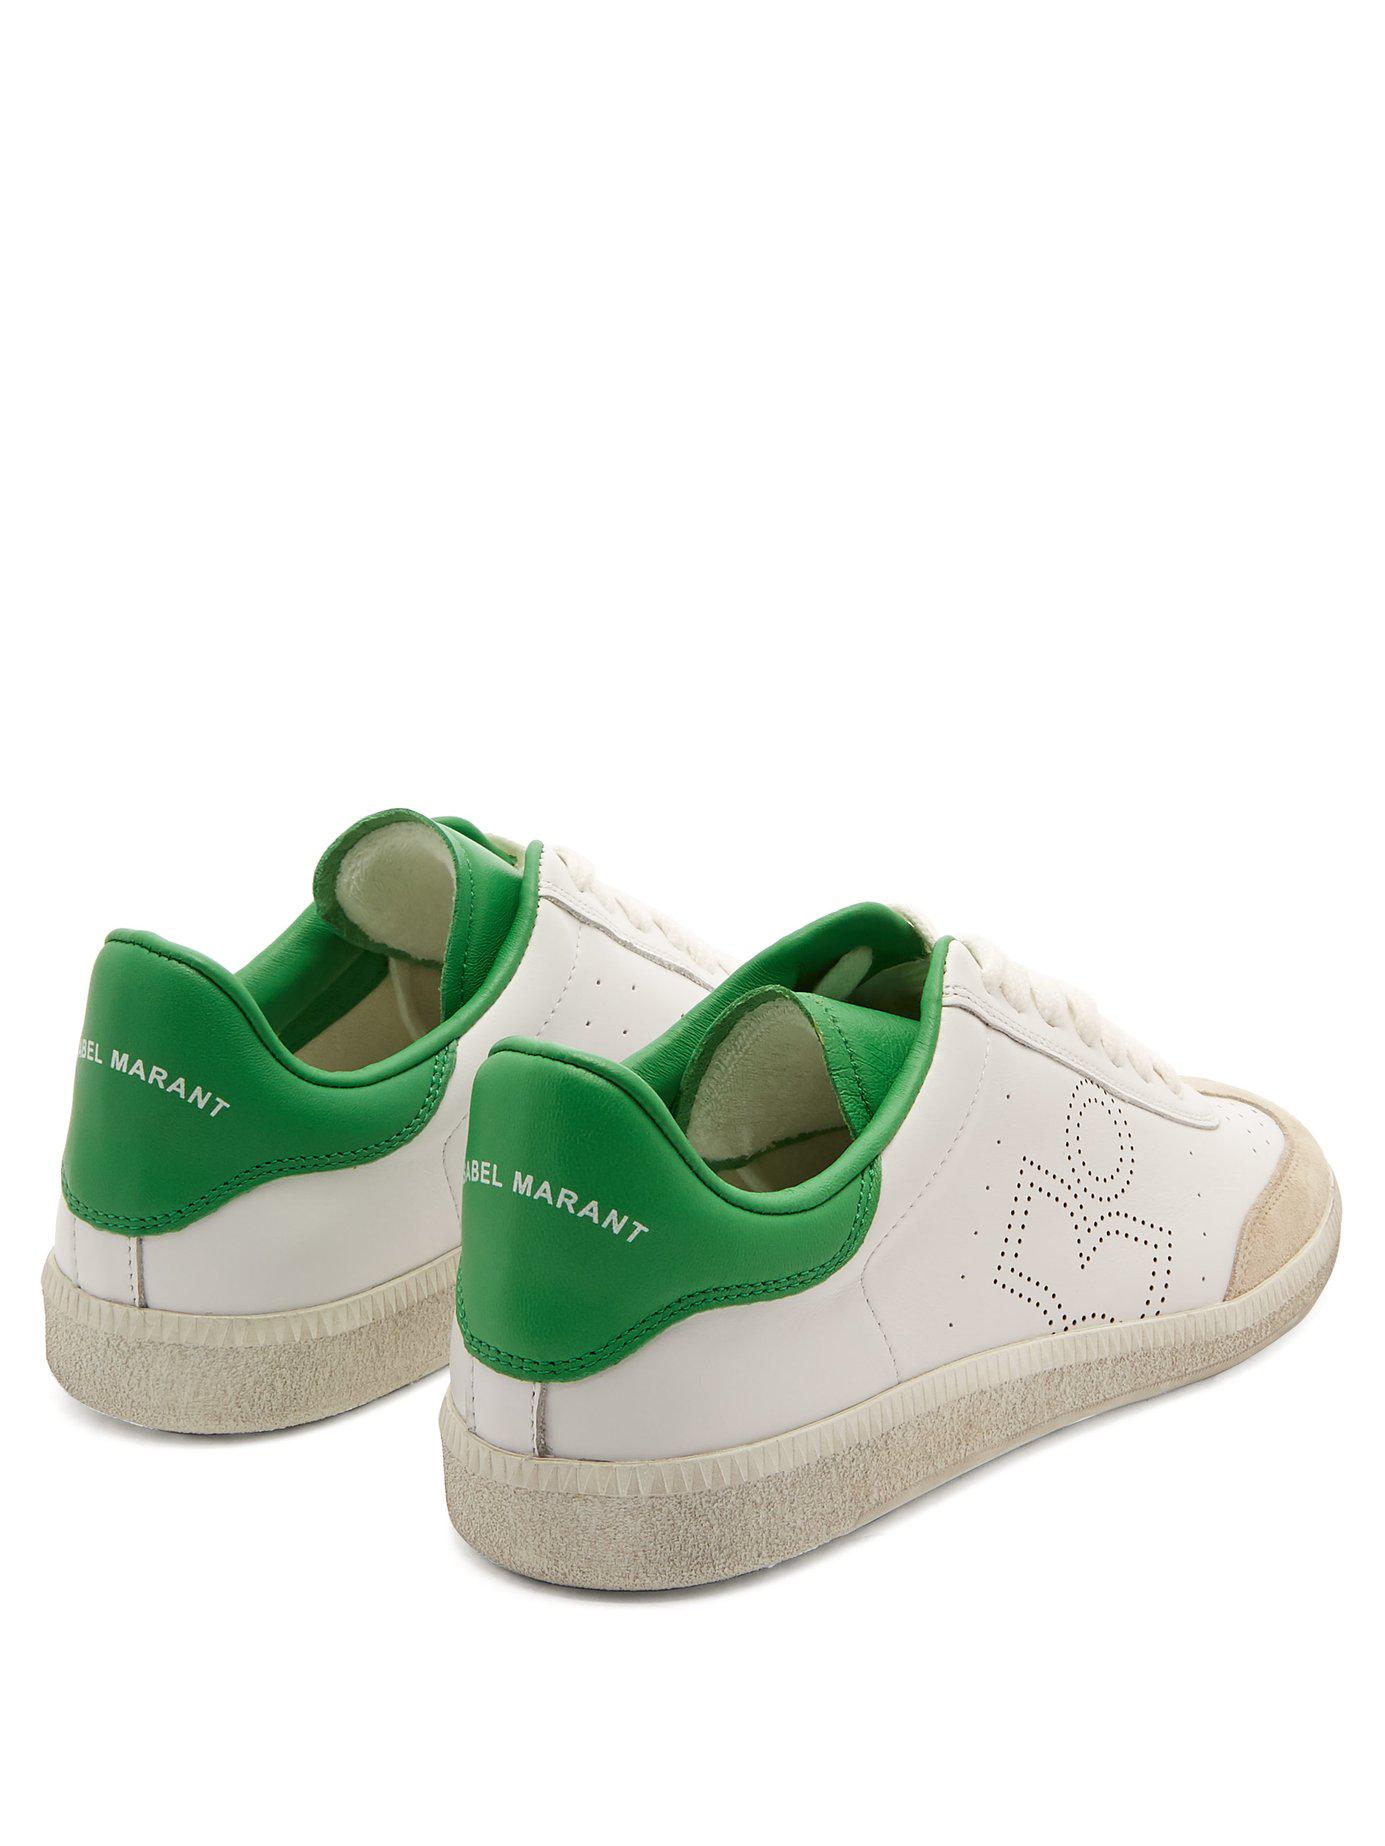 Isabel Marant White And Green Bryce Sneakers | Lyst